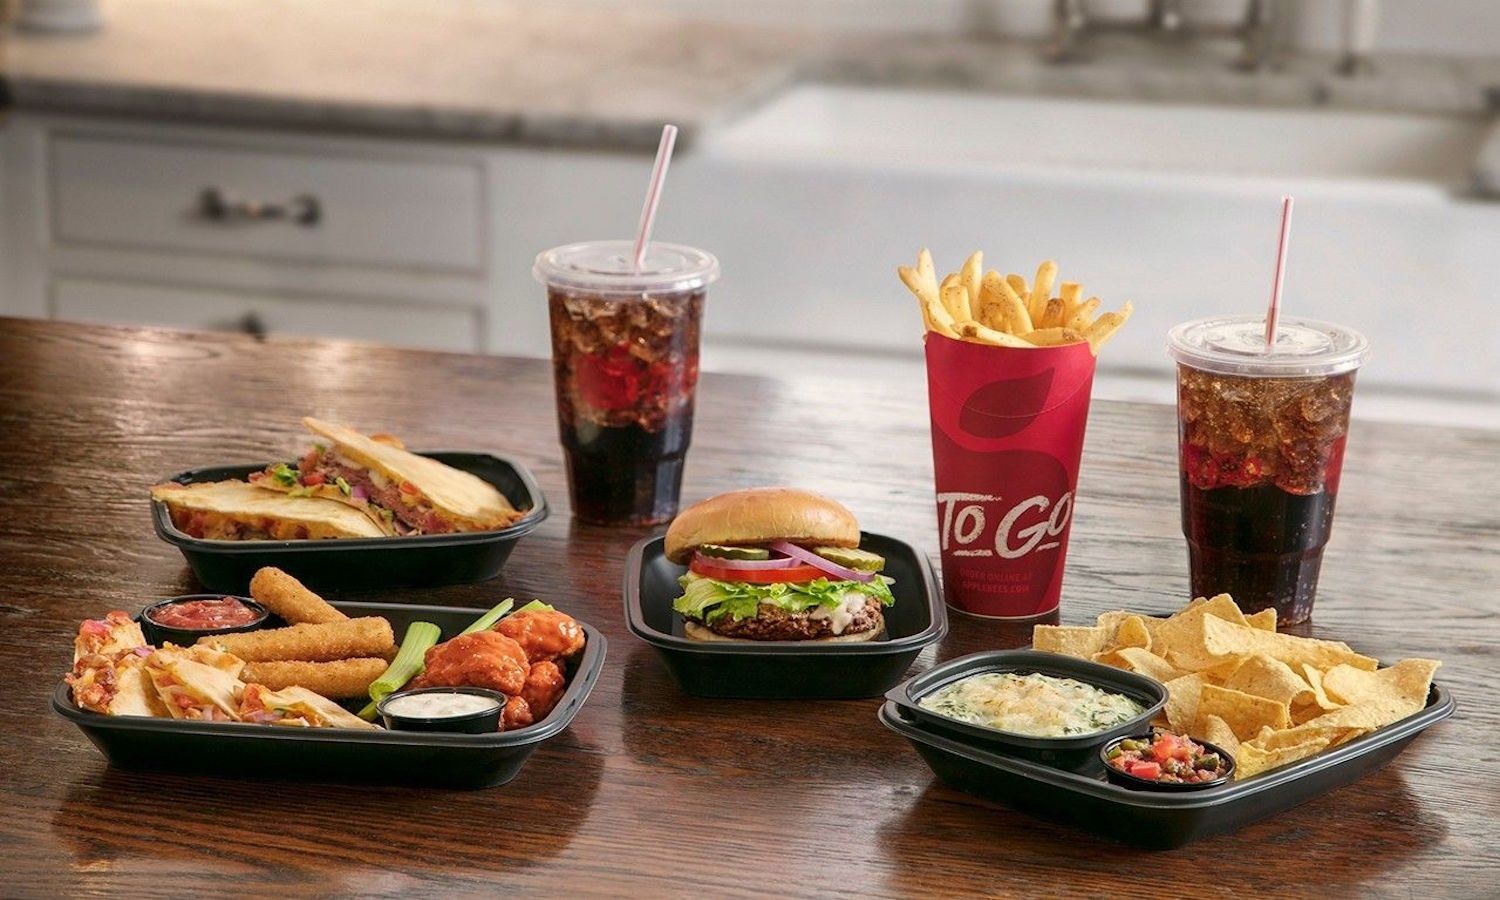 Applebee’s Takeout Near You in Chesterfield